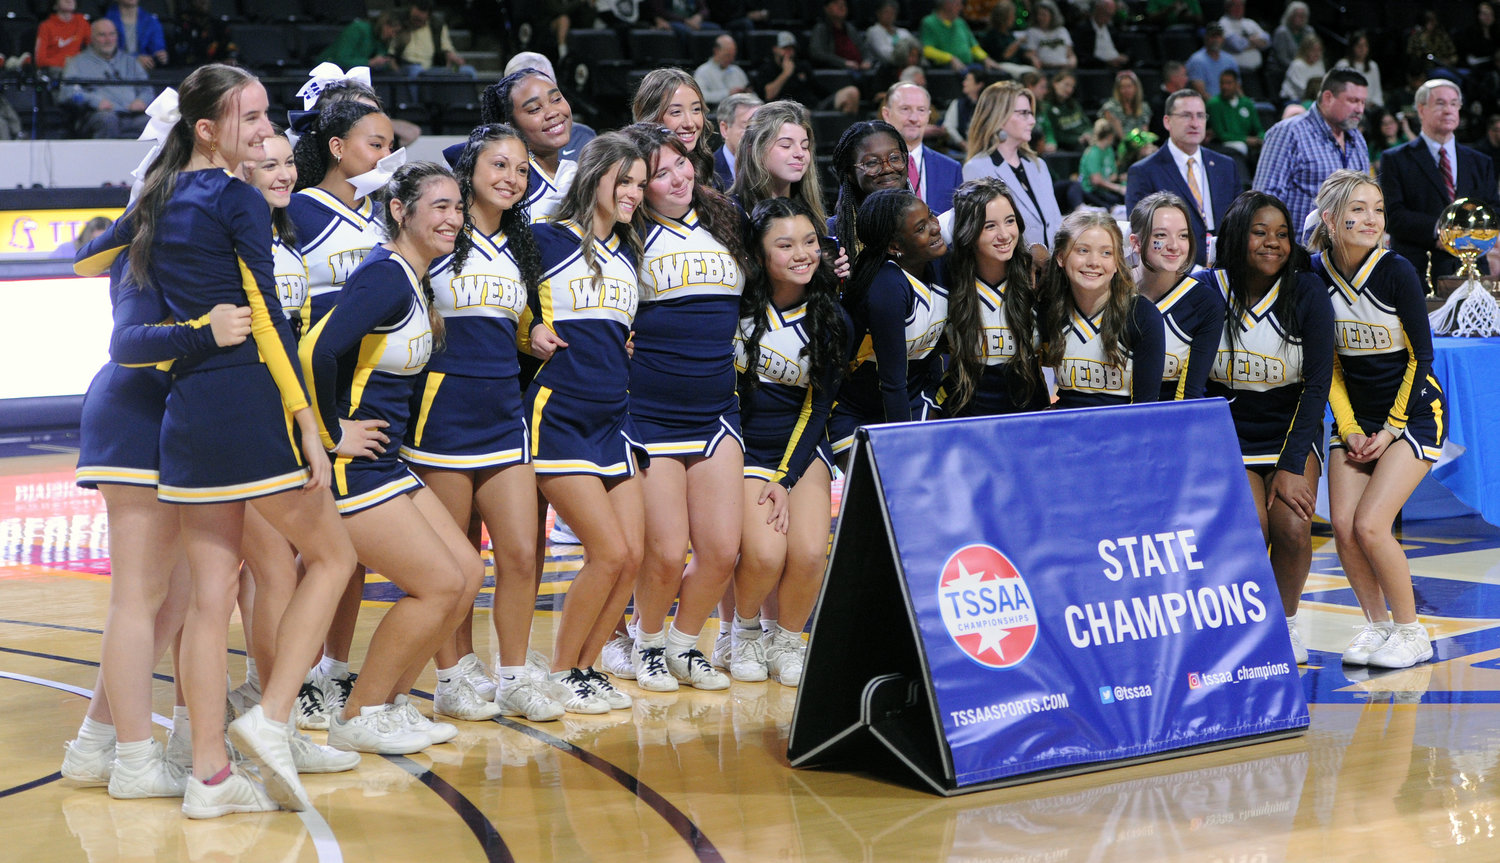 The Webb cheerleaders were honored as the championship cheerleading team following Saturday’s game.